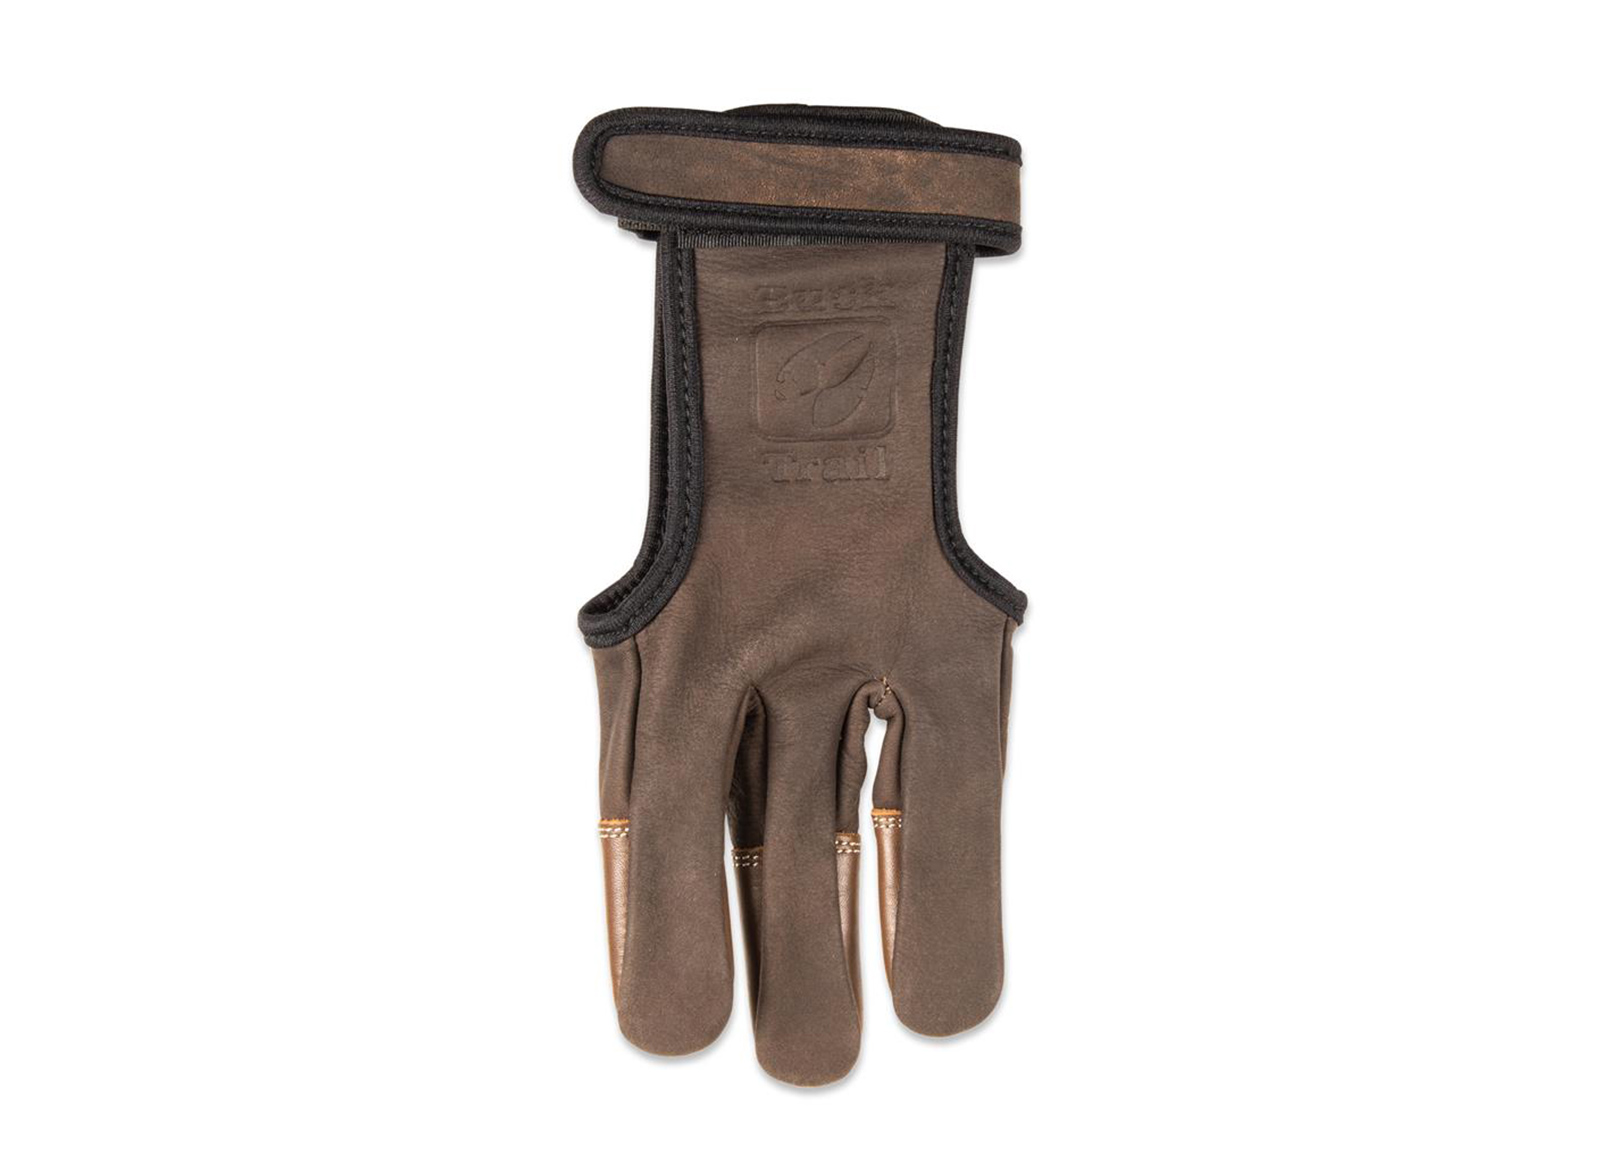 BUCKTRAIL STONE GLOVE IN LEATHER AND CORDOVAN